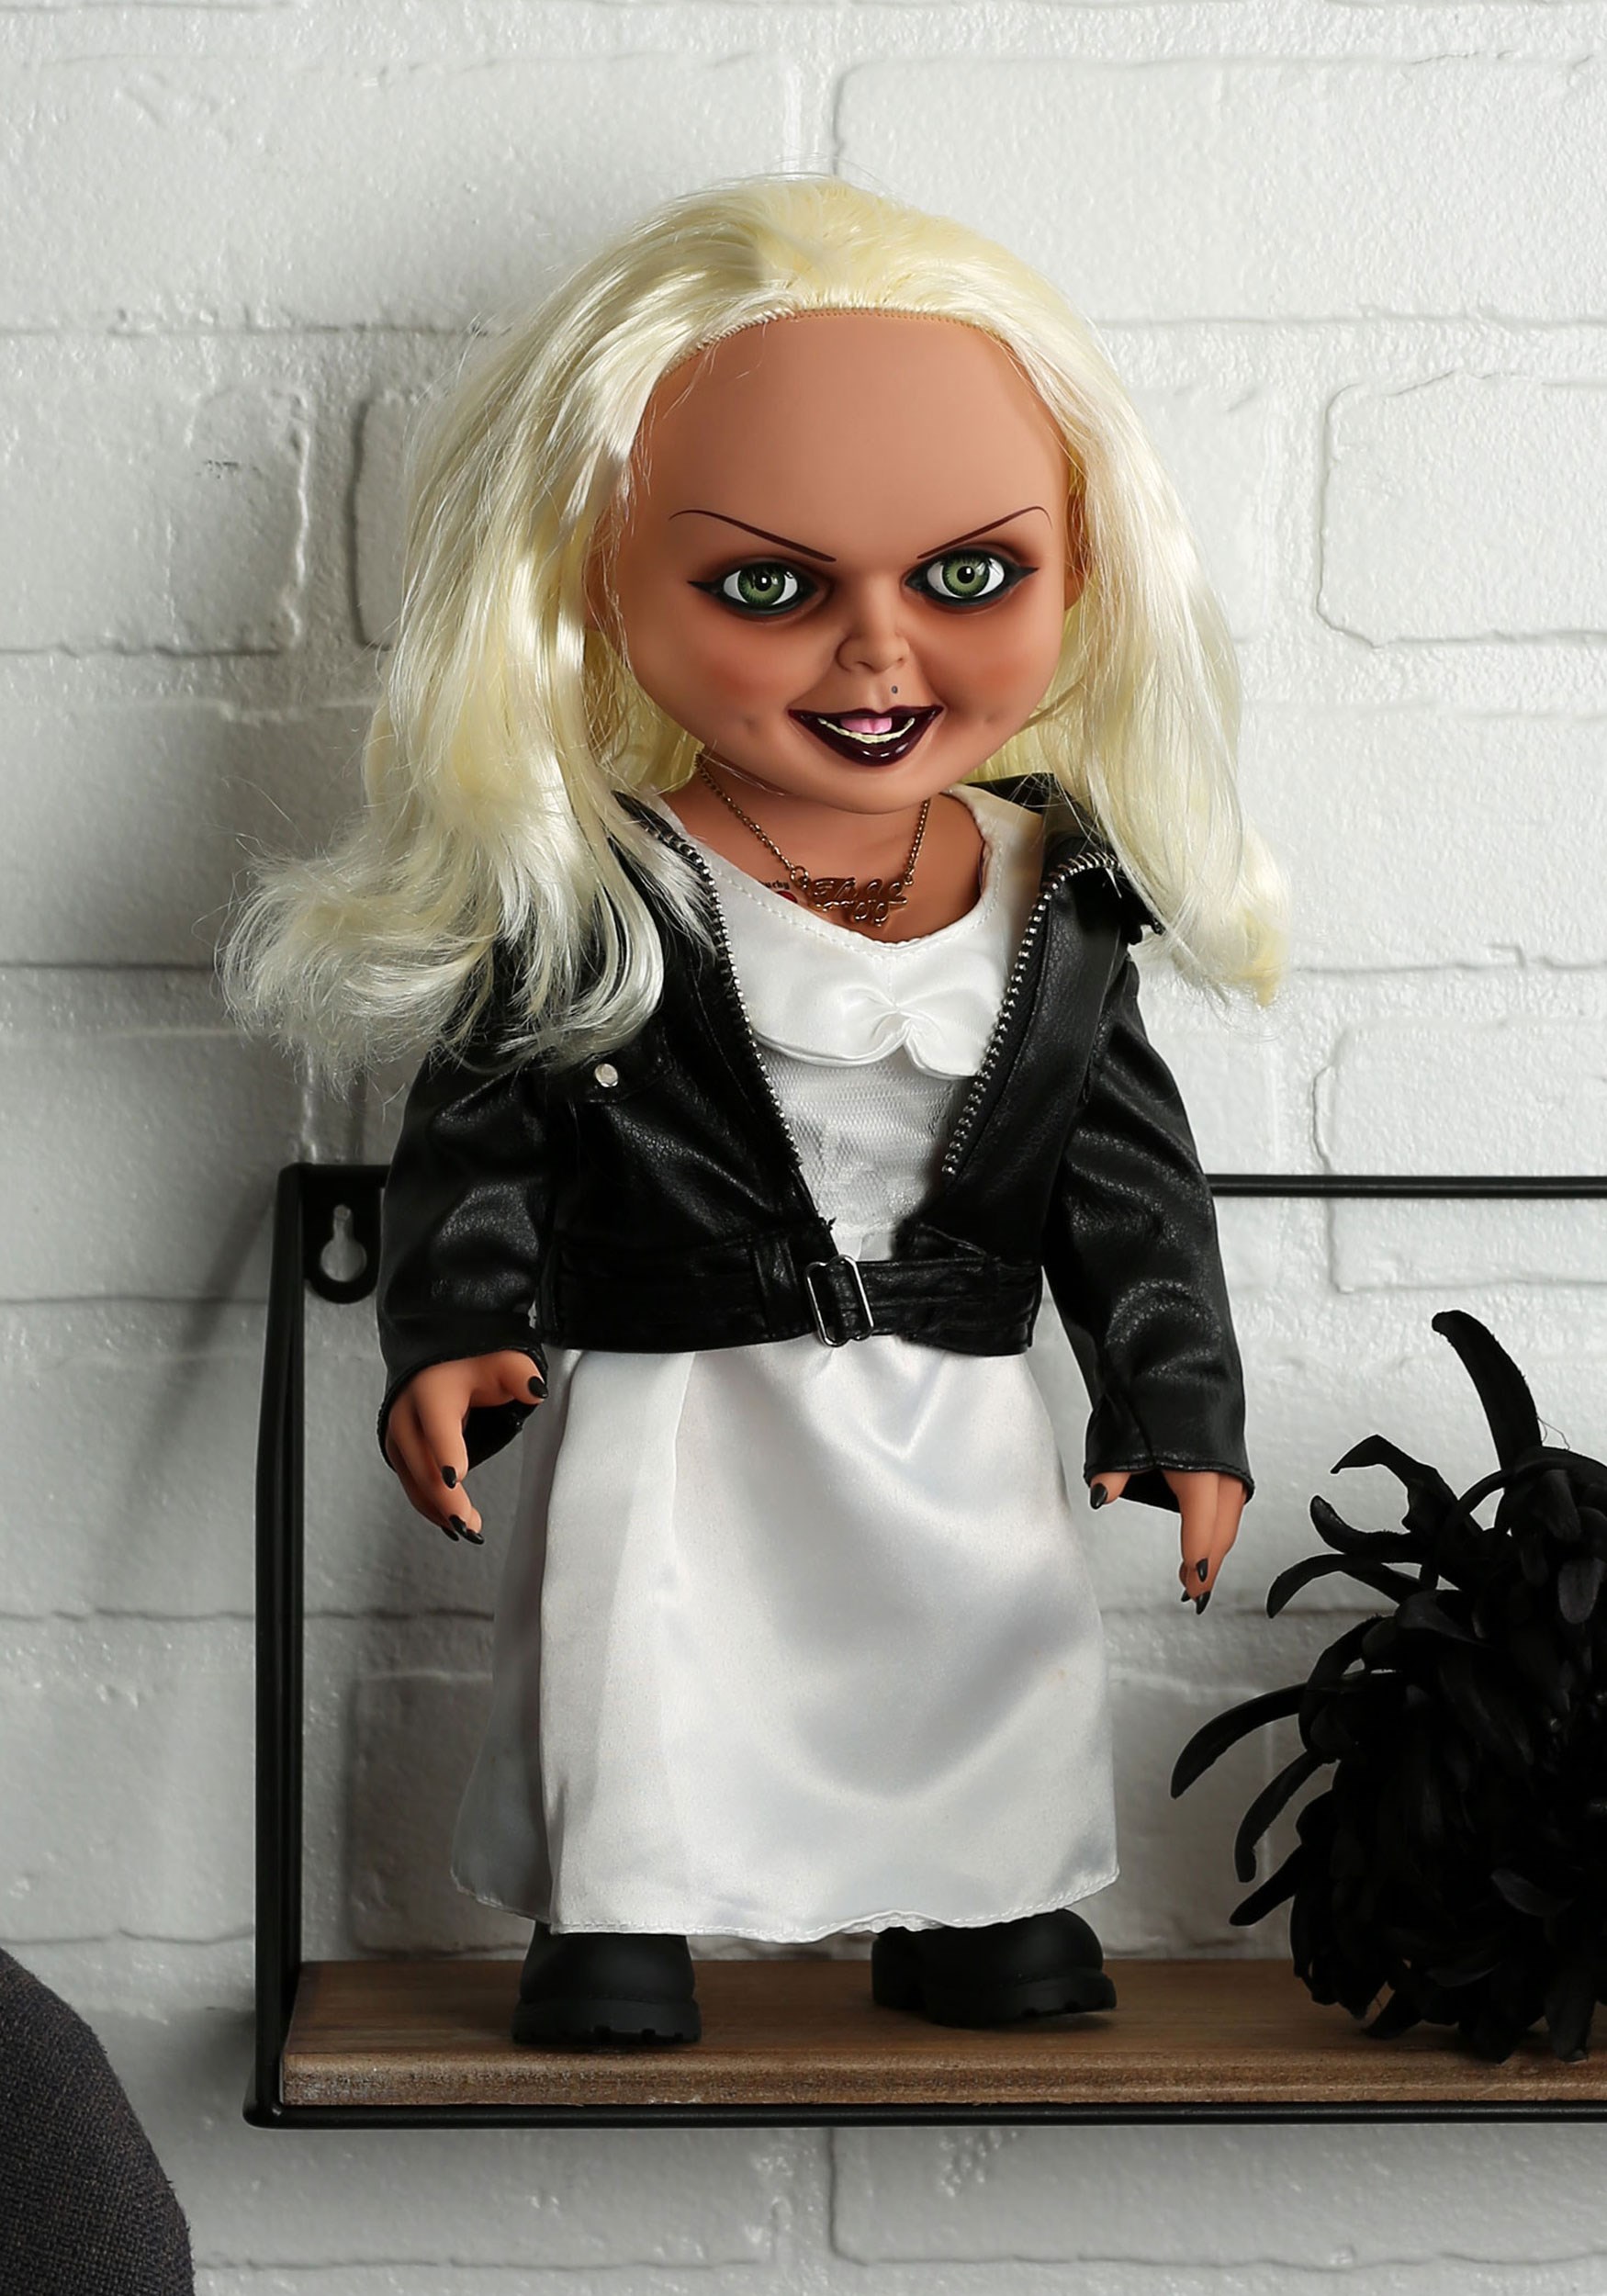 https://images.halloweencostumes.com/products/42986/1-1/bride-of-chucky-tiffany-15-talking-doll1.jpg